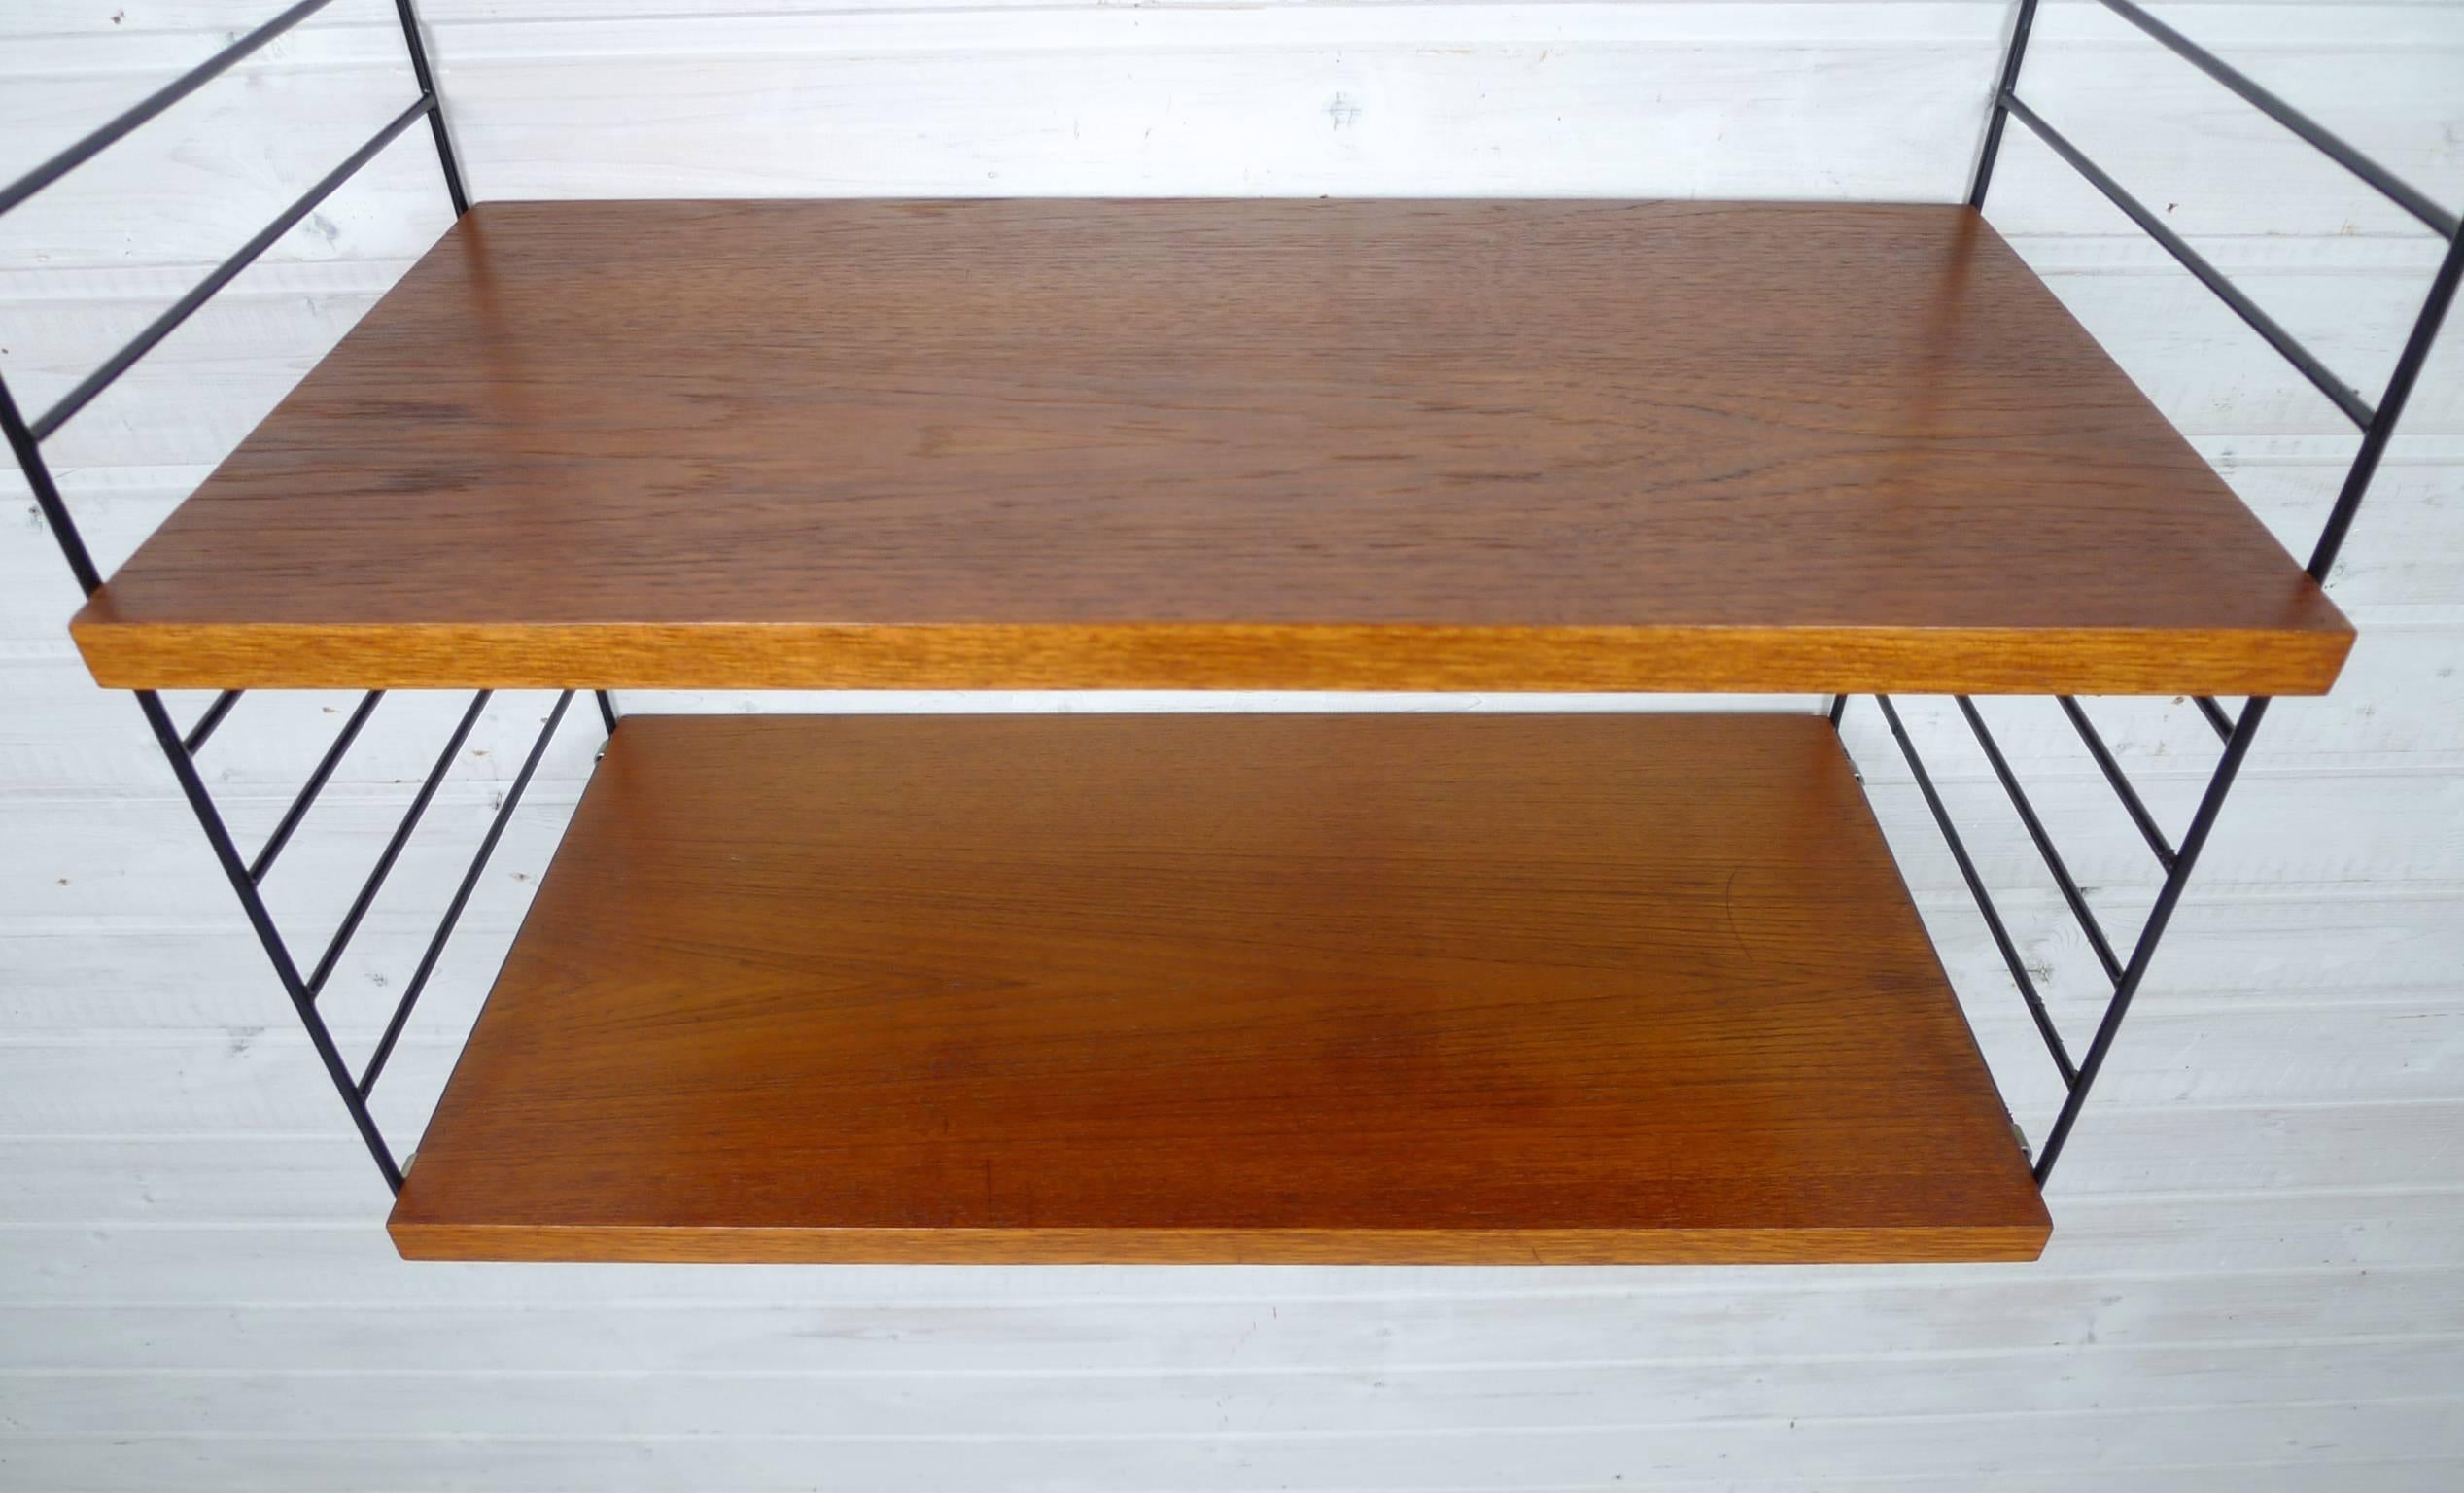 20th Century Teak Wall Shelving System by Nisse Strinning for String Design AB, Sweden, 1950s